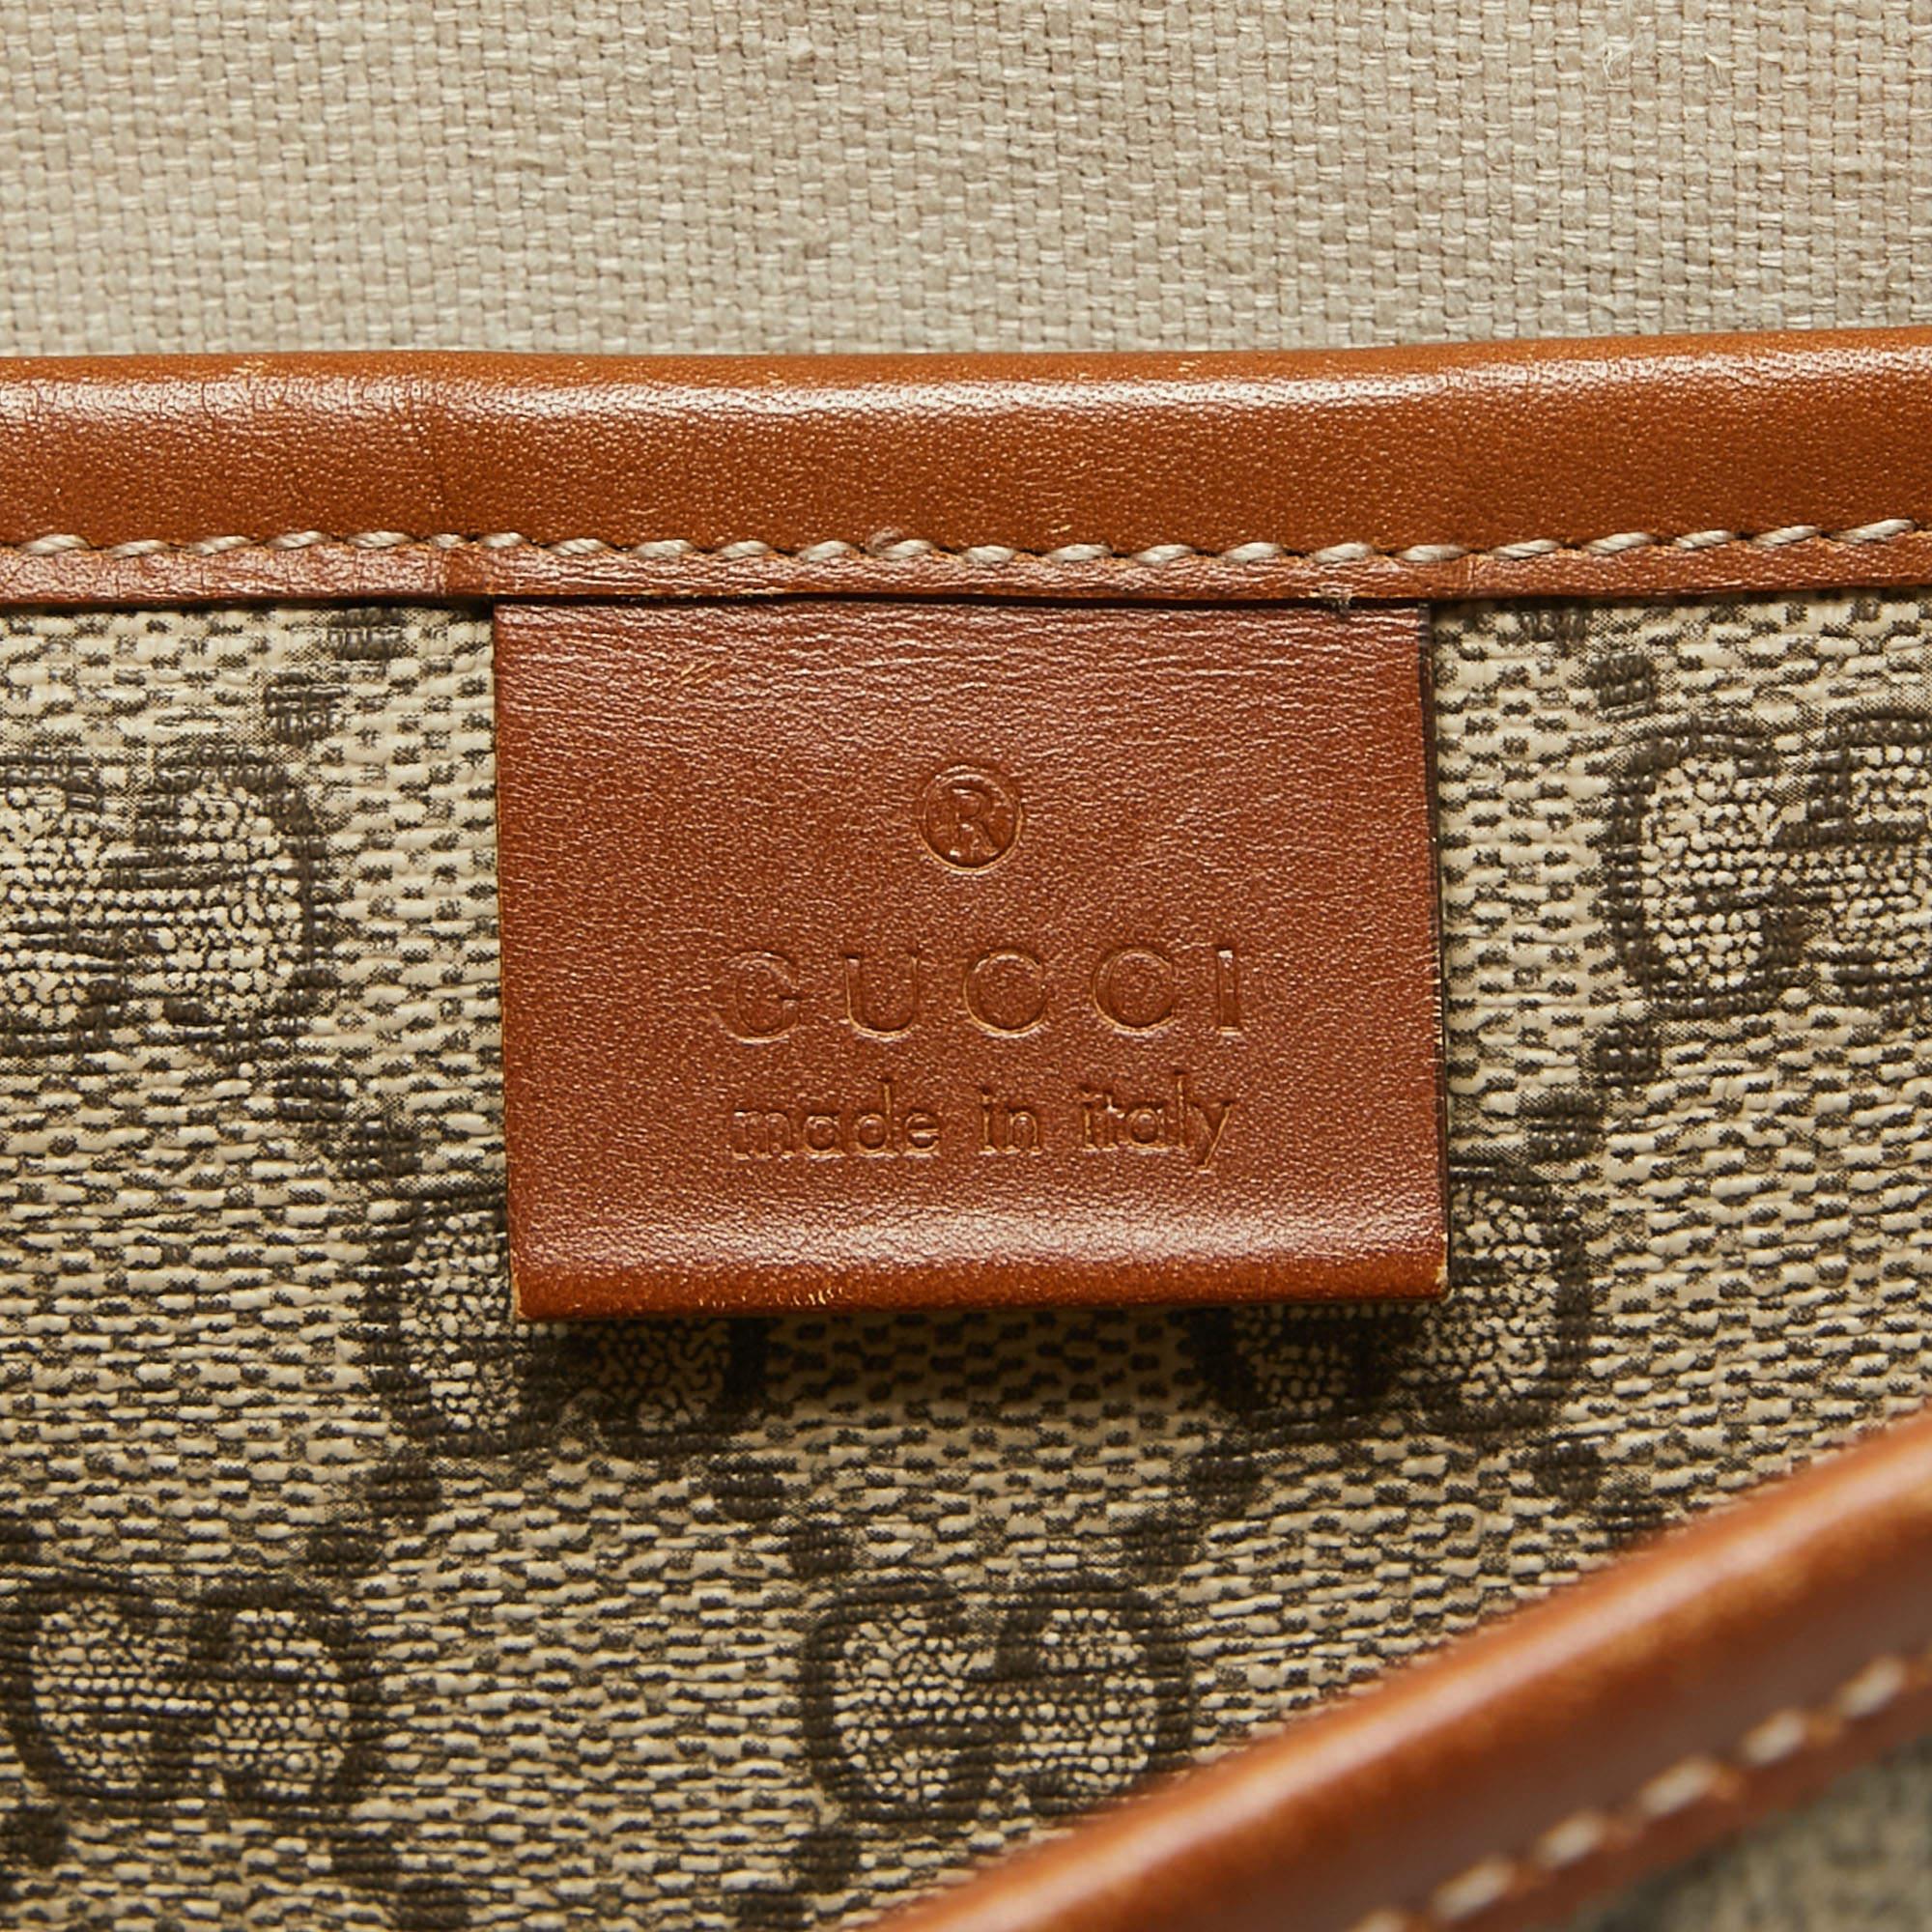 Gucci Beige/Brown GG Supreme Canvas And Leather Messenger Bag For Sale 4